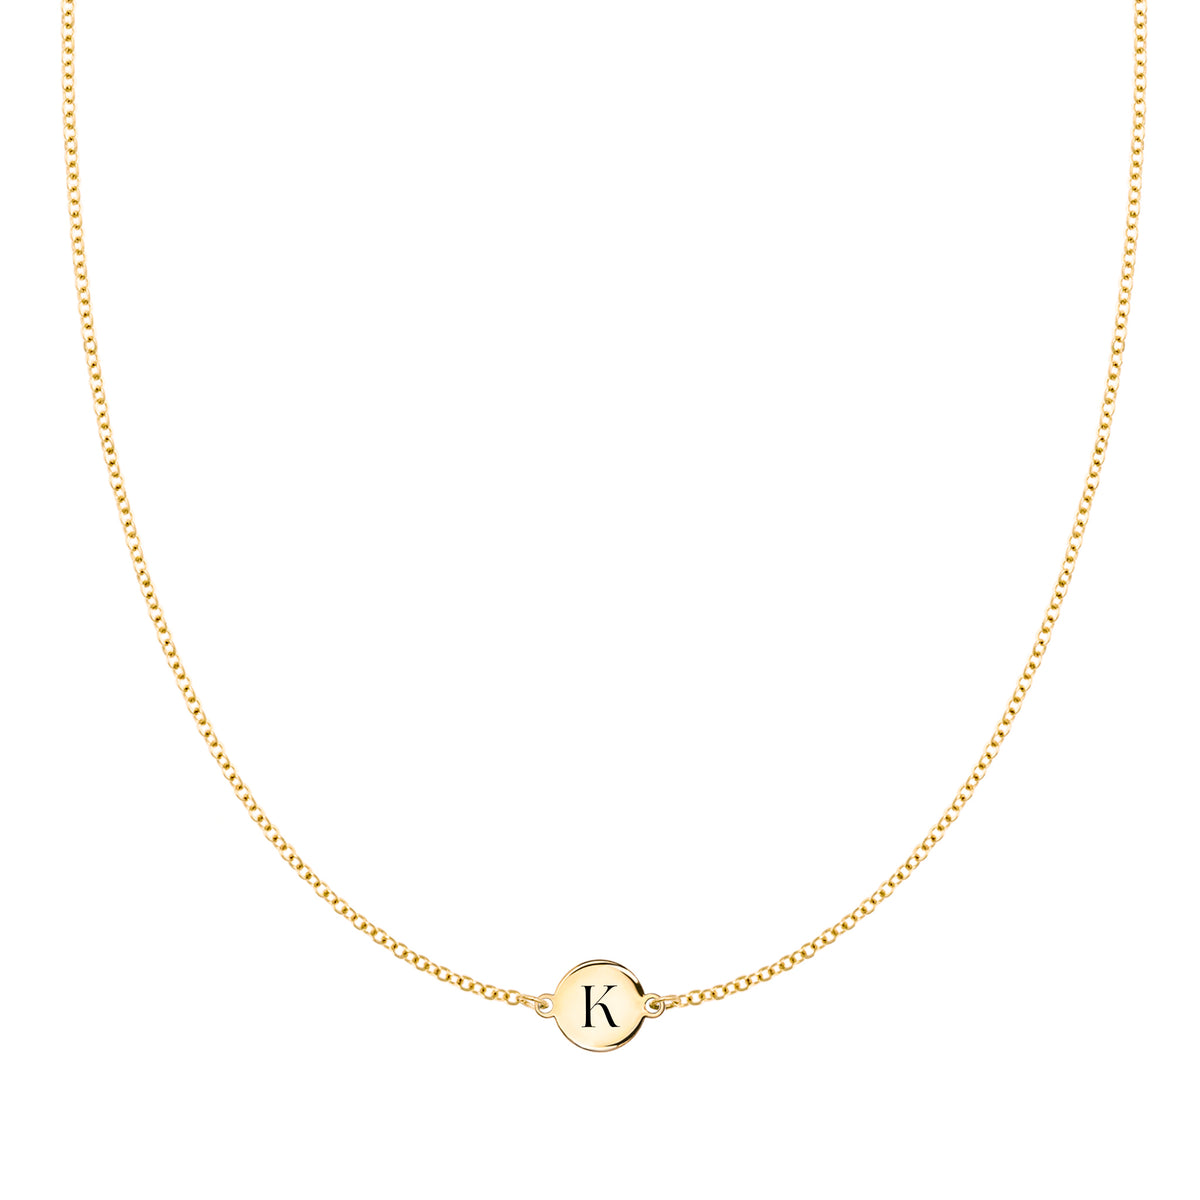 Initial Necklace Pearl Charm Letter K Diamond Pendant Yellow Gold